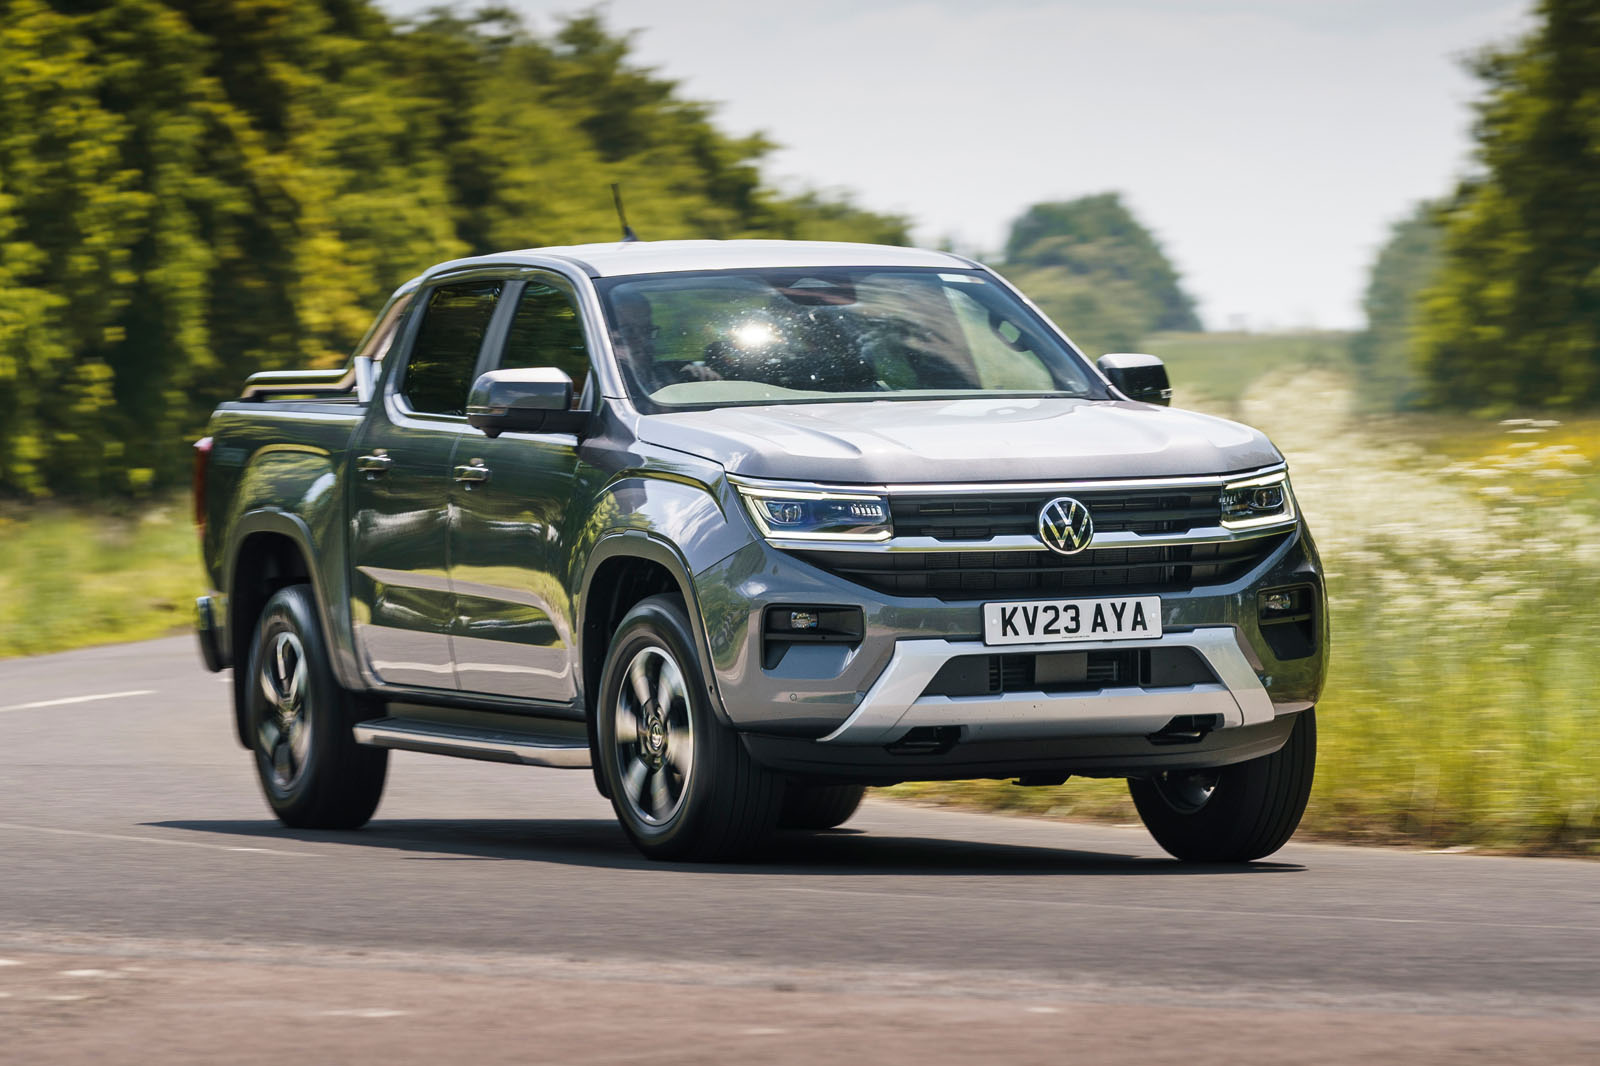 https://www.autocar.co.uk/sites/autocar.co.uk/files/images/car-reviews/first-drives/legacy/volkswagen-amarok-style-review-2023-01-cornering-front.jpg